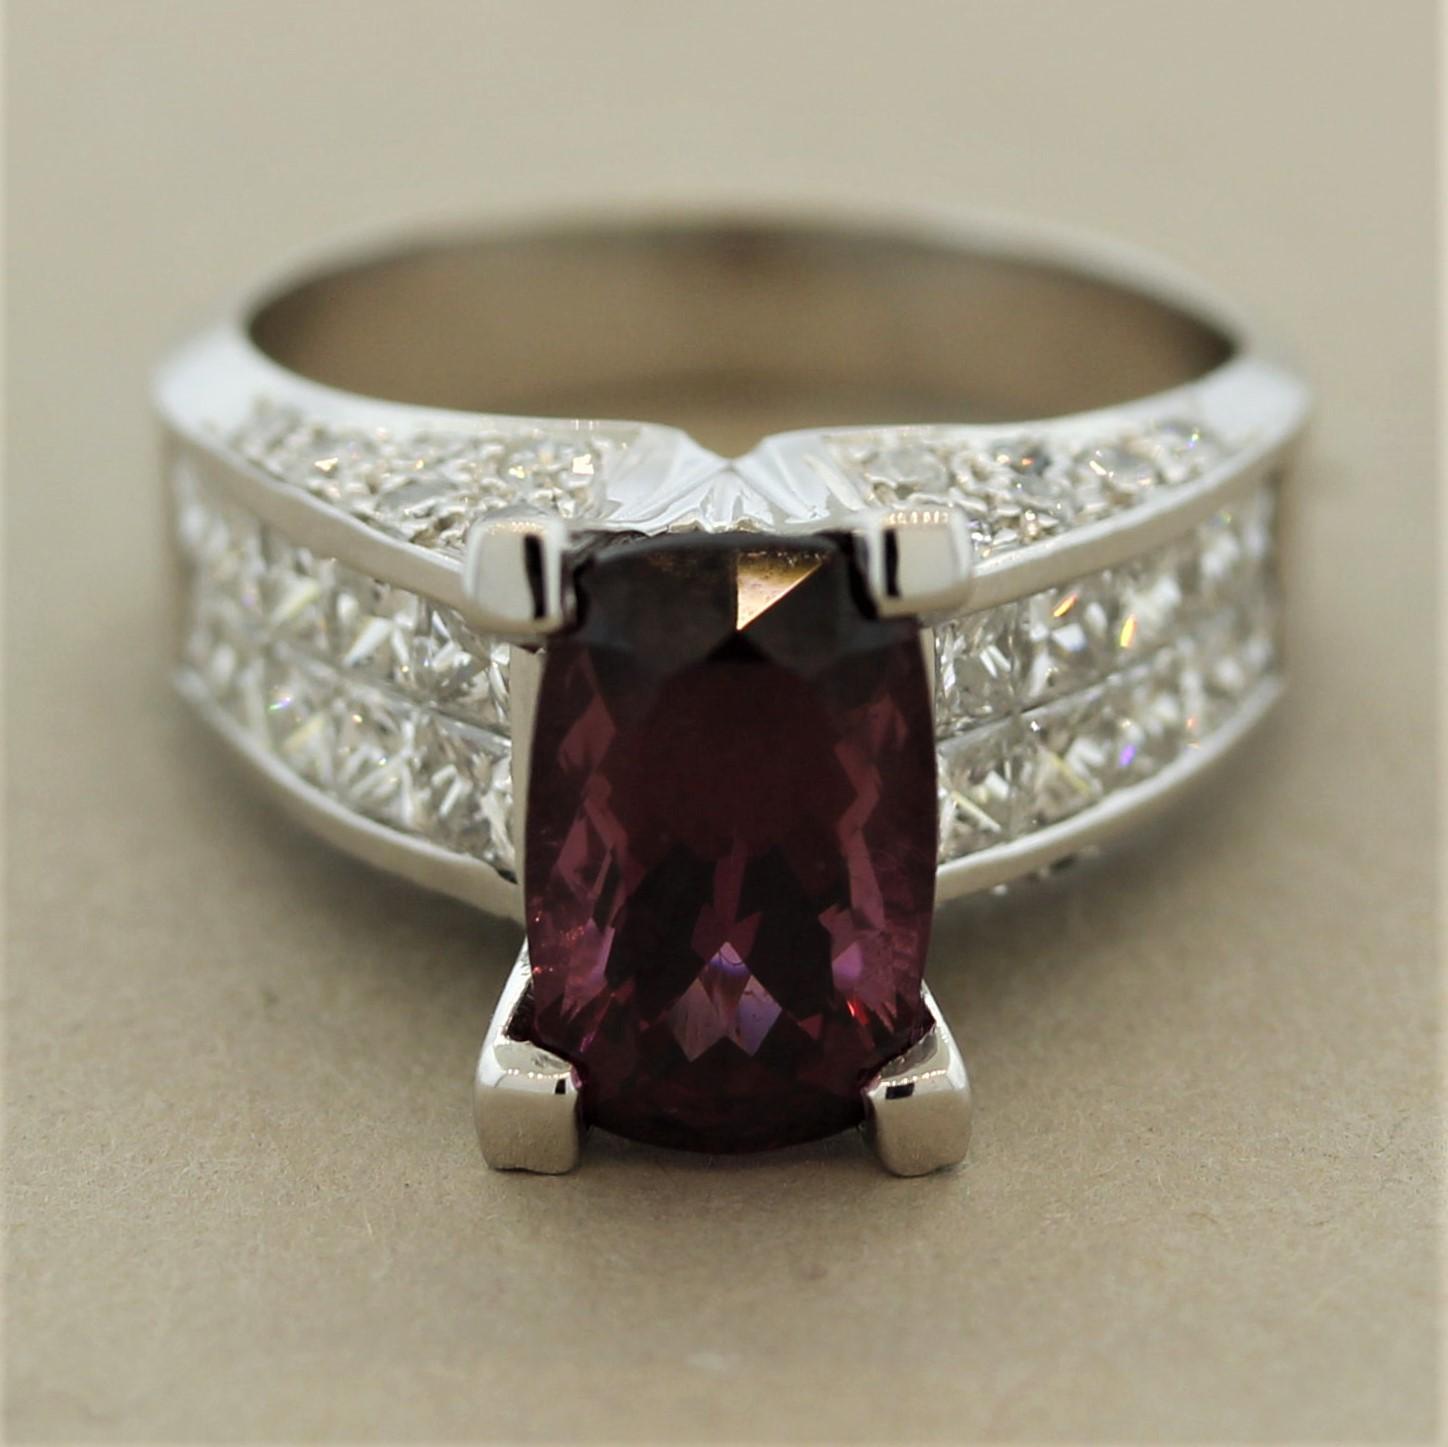 A gemmy 3.35 carat rhodolite garnet with a bright and vivid red-purple color takes center stage. It is accented by 1.48 carats of round brilliant-cut and princess-cut diamonds set atop the ring and on its sides. Made in 18k white gold.

Ring Size